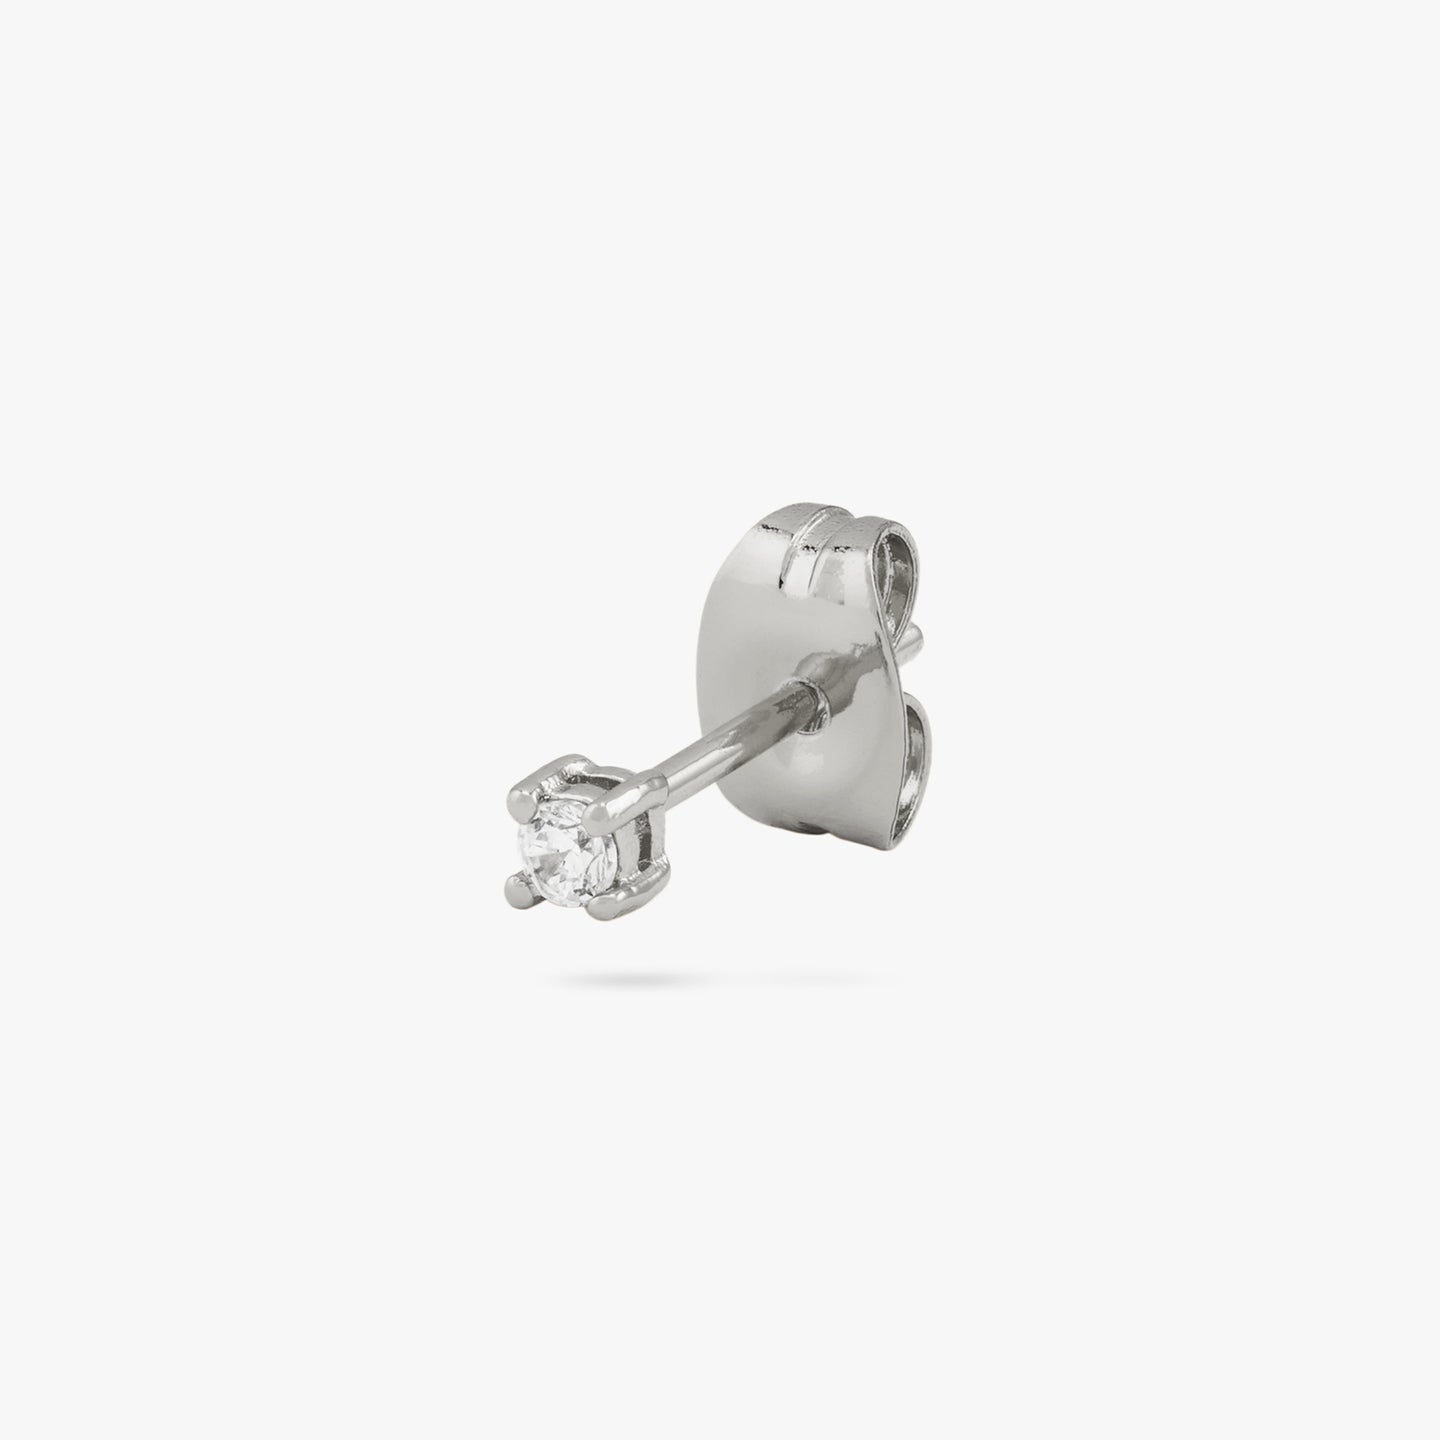 A mini silver stud with a clear cz gem color:null|silver/clear